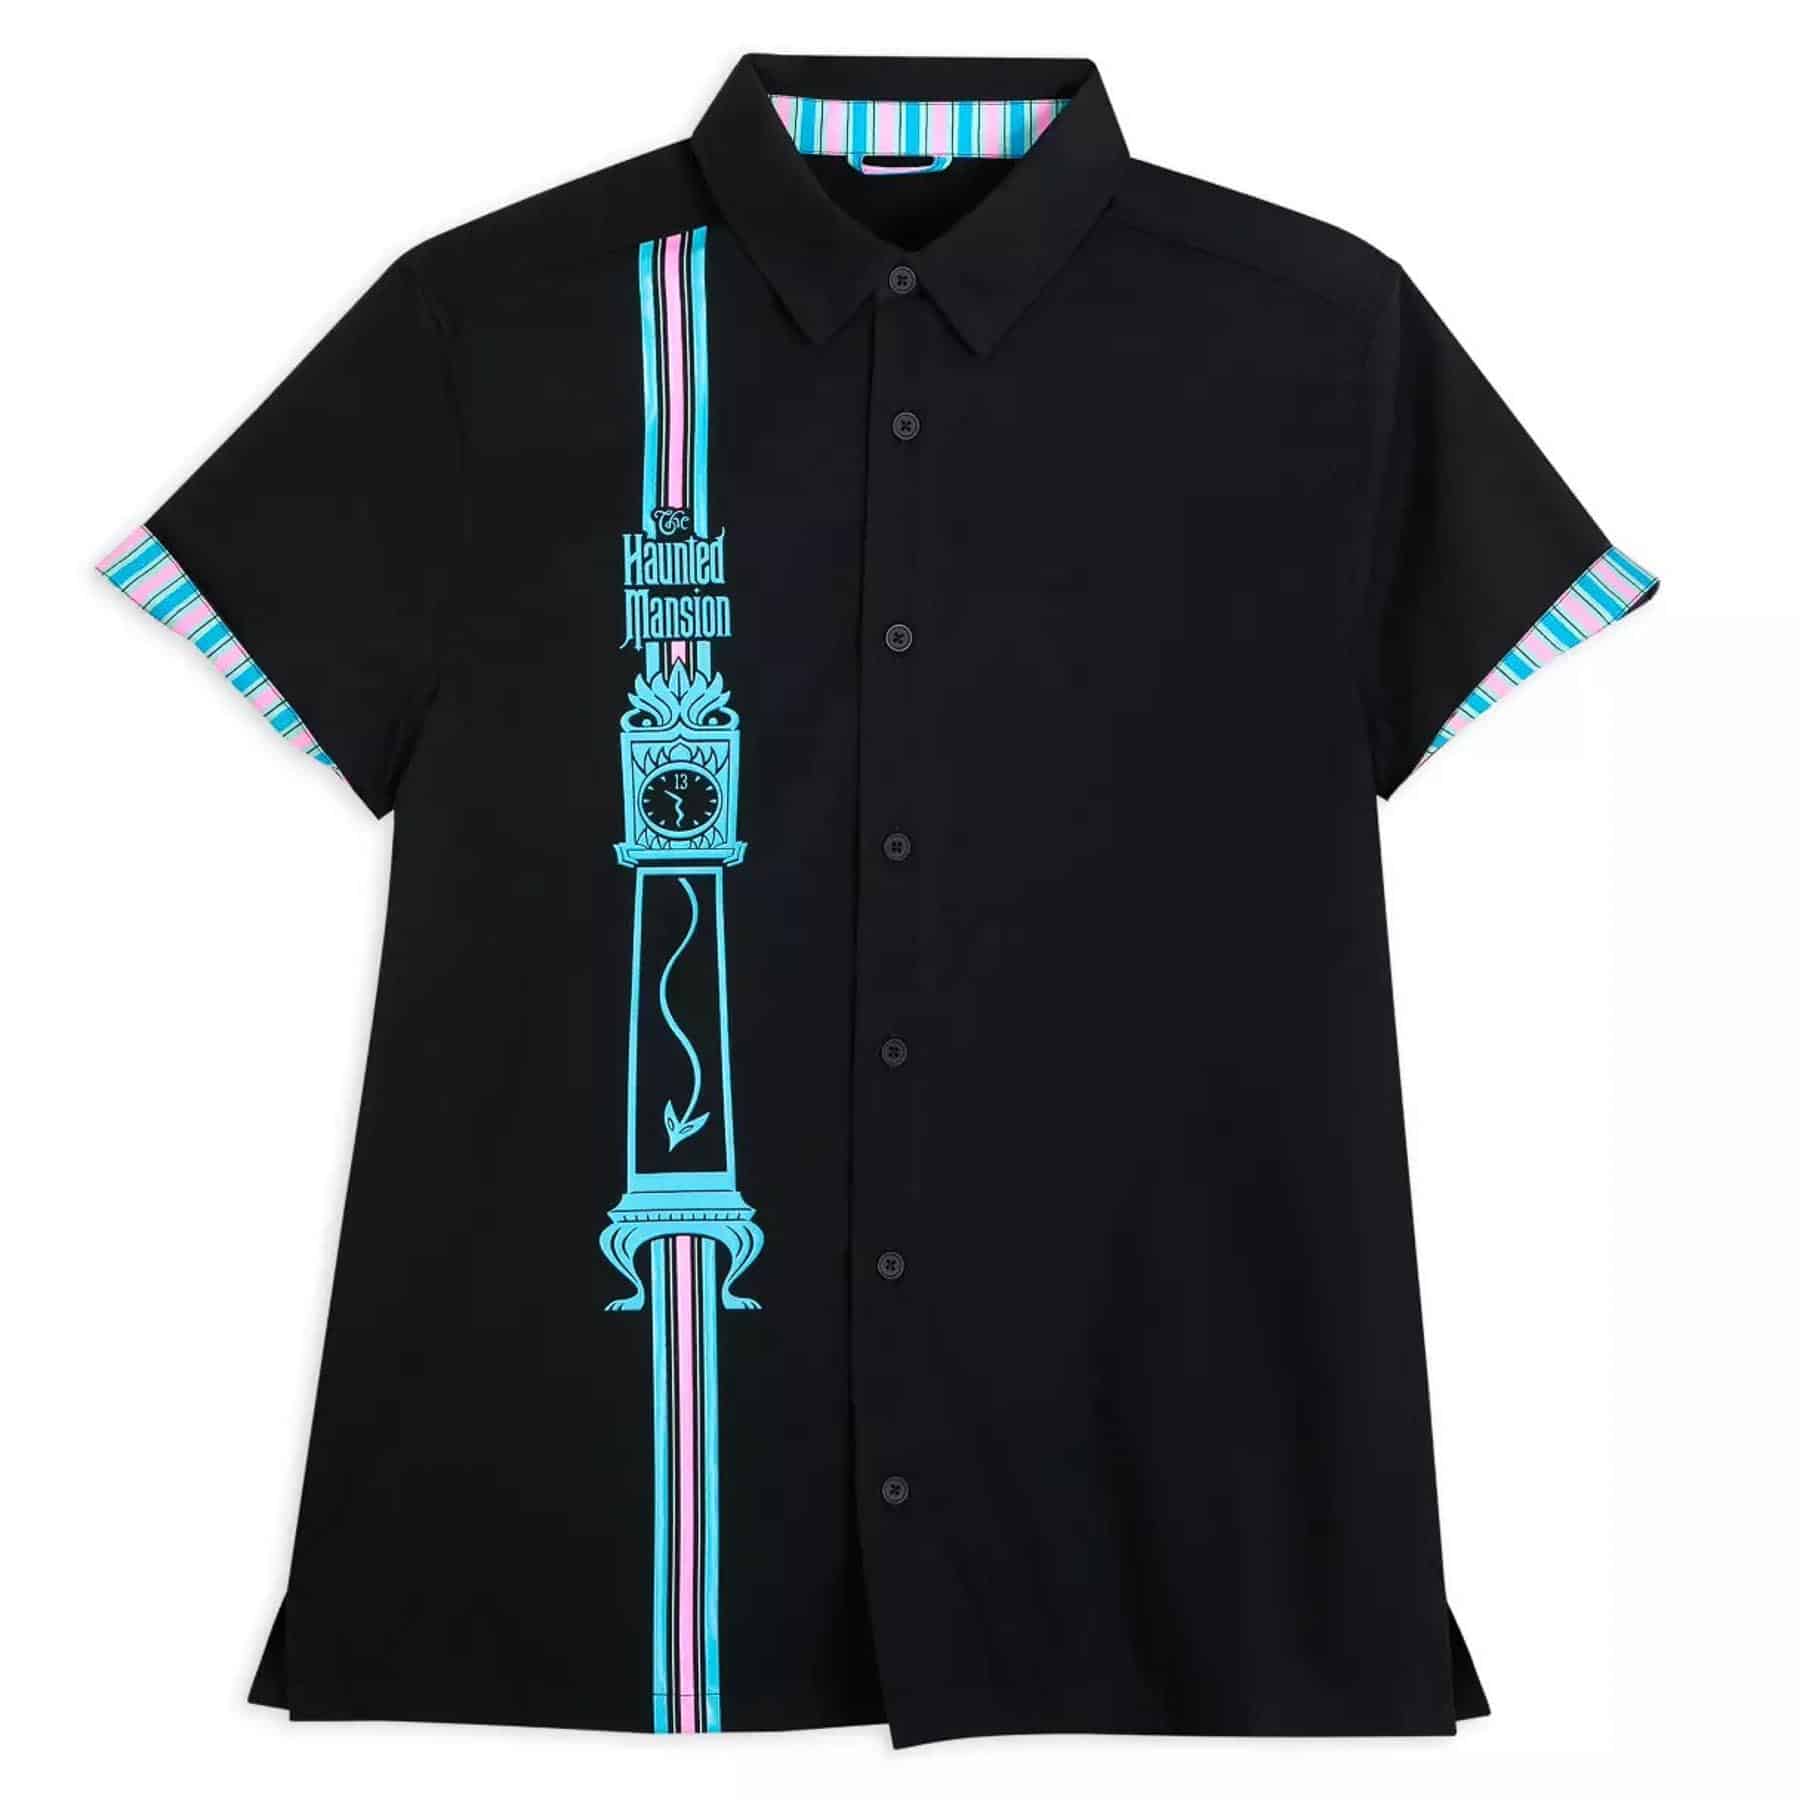 Black button up shirt that has the Haunted Mansion written in a stripe down one side with bright blue and pink stripes. 